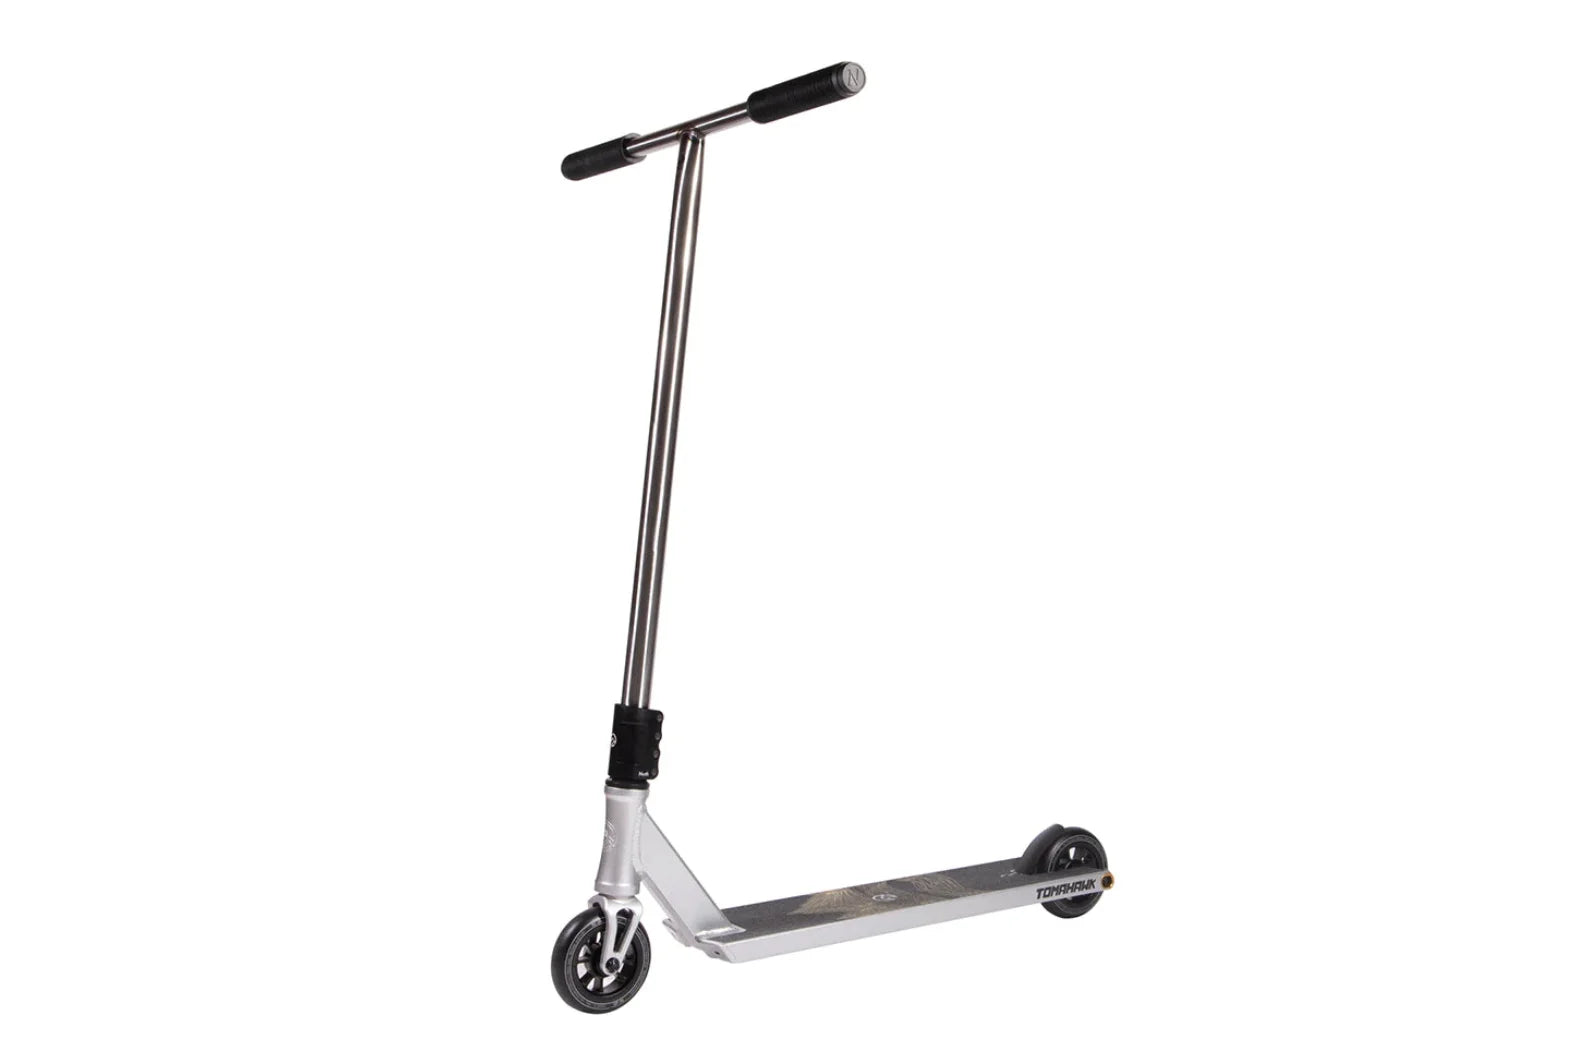 north-complete-tomahawk-g2-silver-black-trottinette-scooter